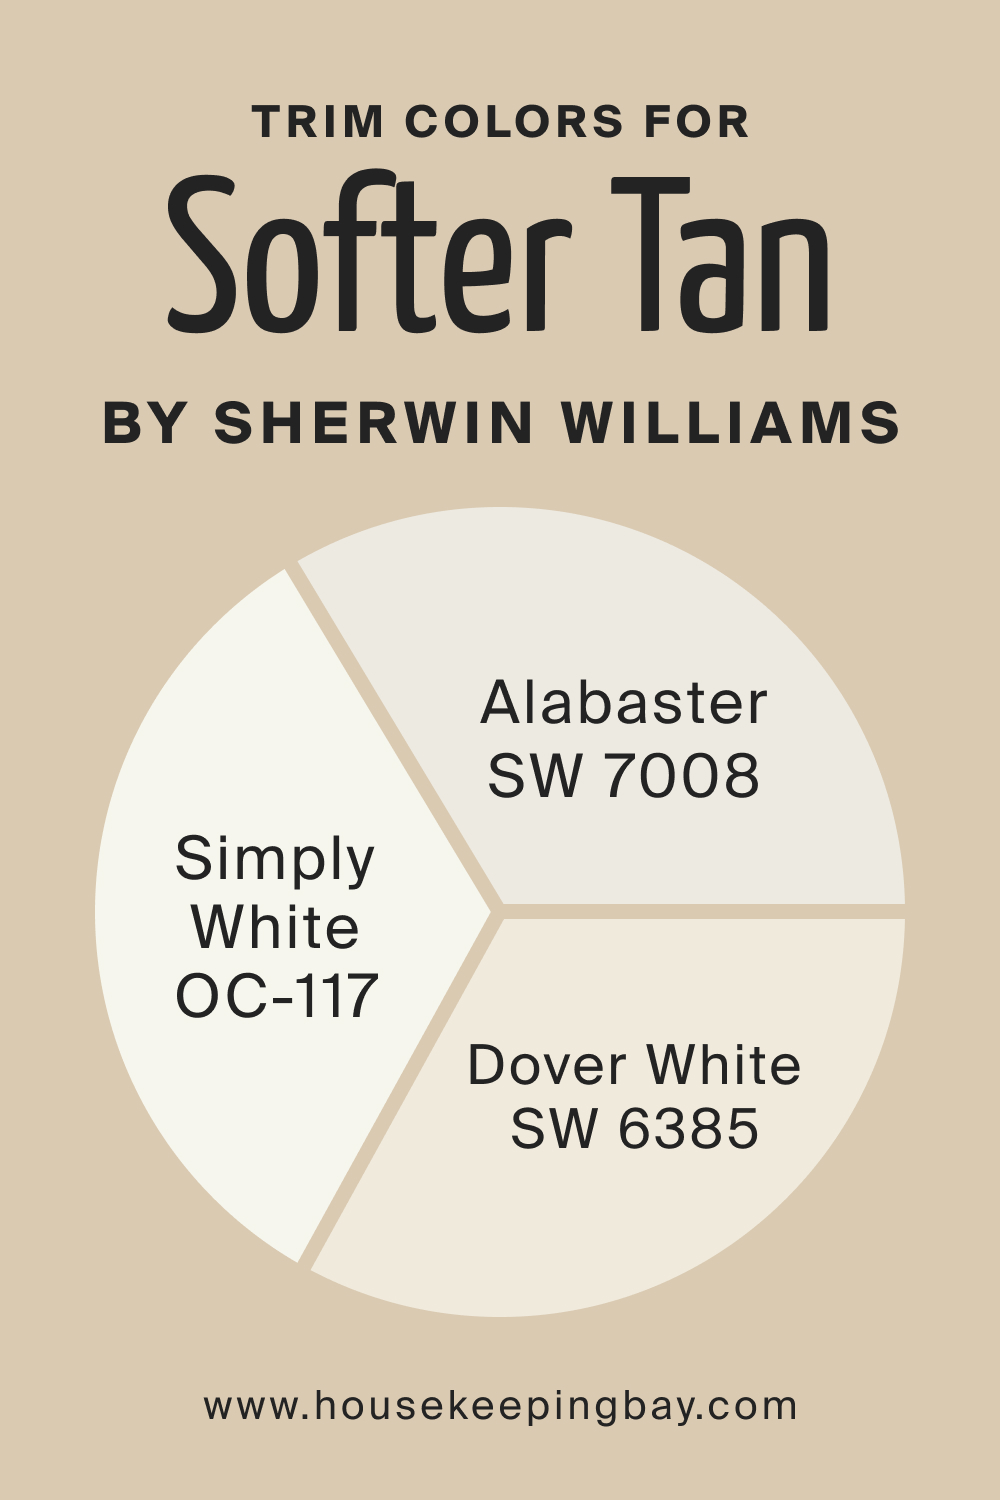 Trim Colors for SW Softer Tan by Sherwin Williams